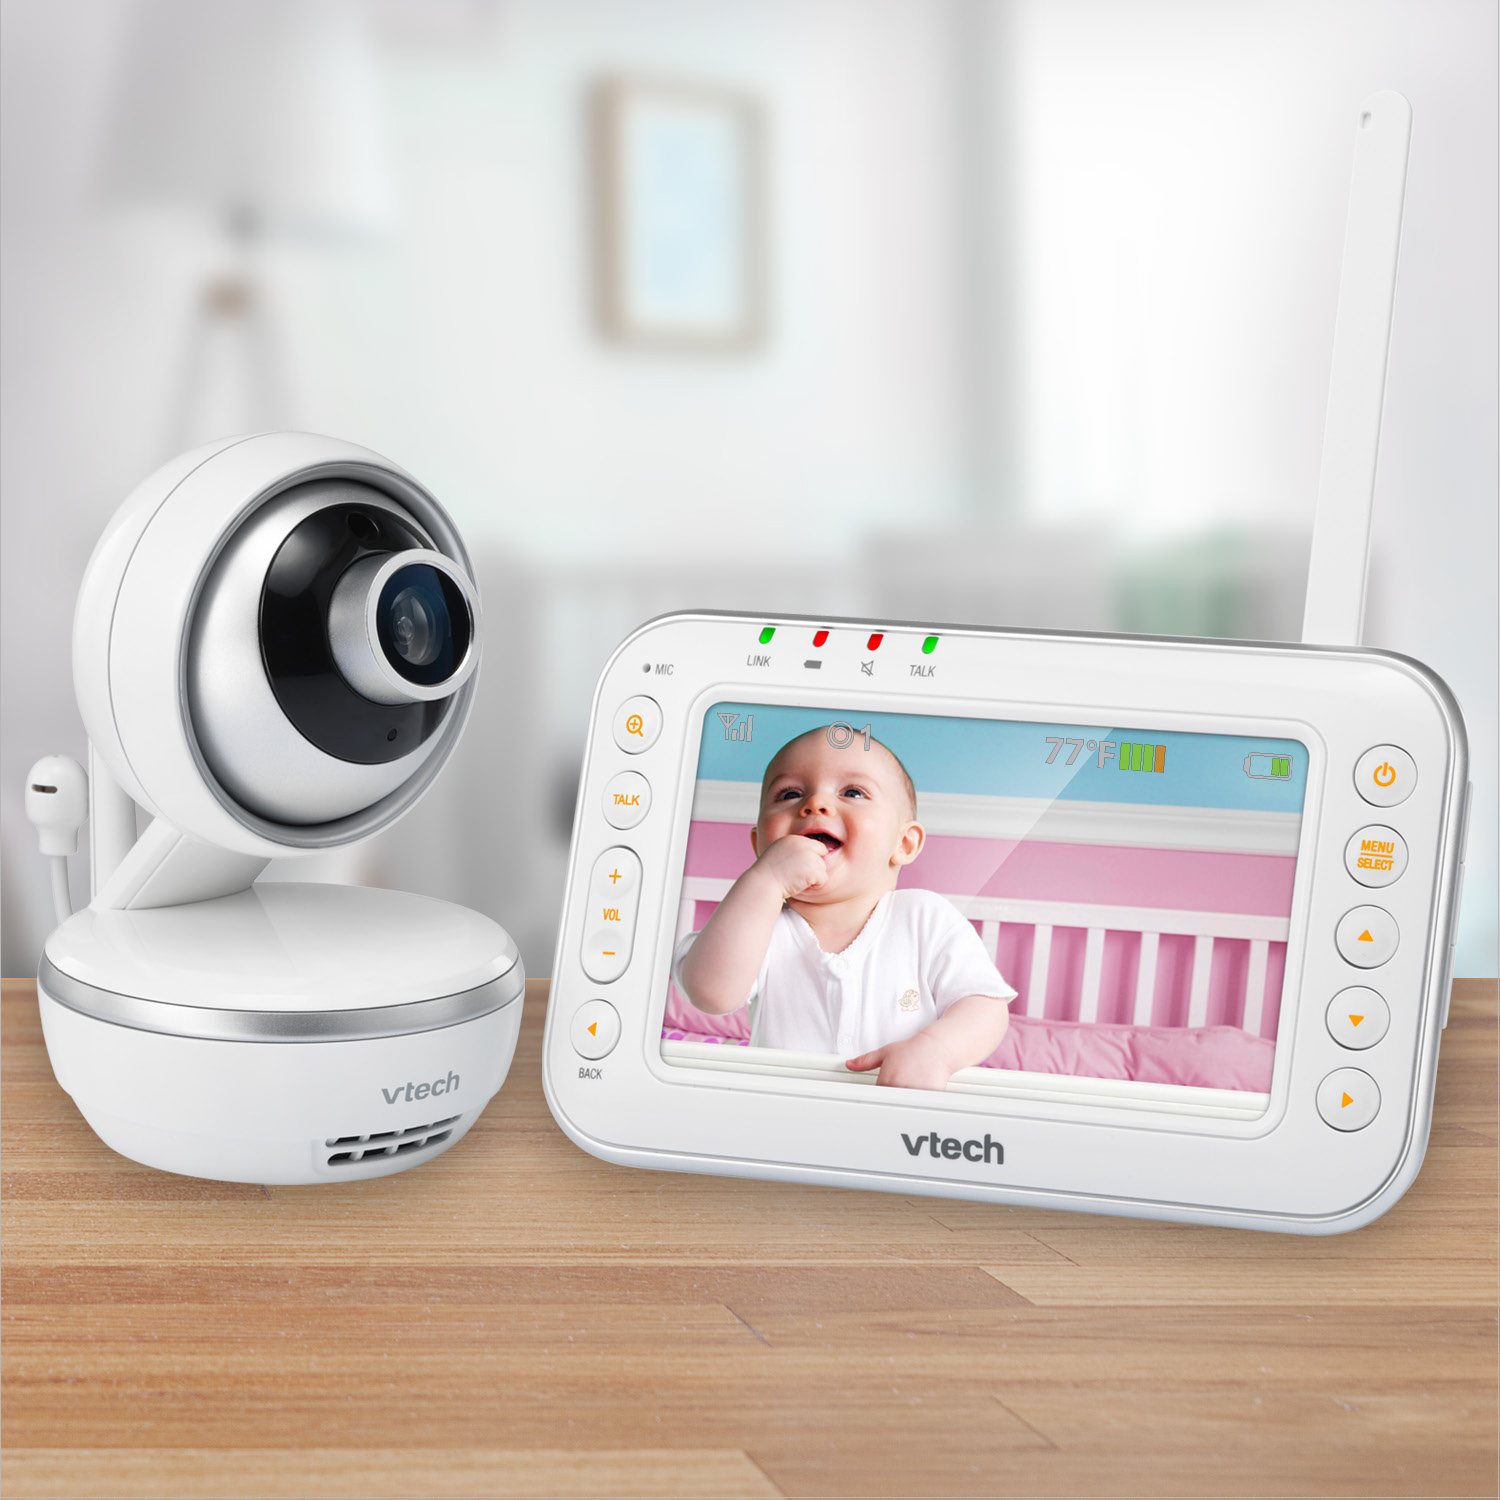 VTech VM4261, 4.3" Digital Video Baby Monitor with Pan & Tilt Camera, Wide-Angle Lens and Standard Lens, White - image 7 of 13